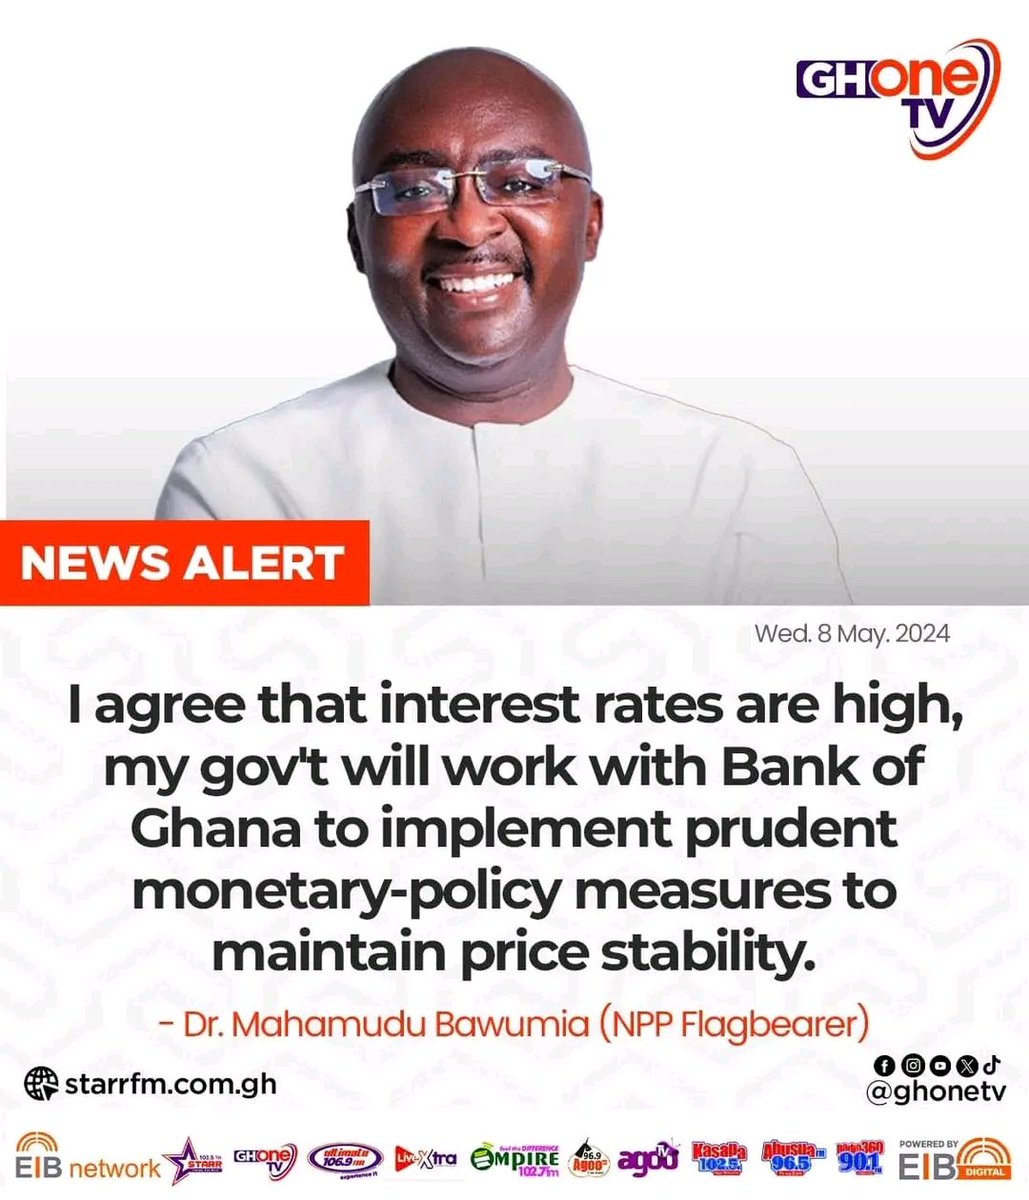 In 2017, you told us Ghanacard and digital address will reduce interest rate.

We are in 2024 and you are back again telling us that interest rates are high and that your government will reduce it if you become President.

Political SCAMMER